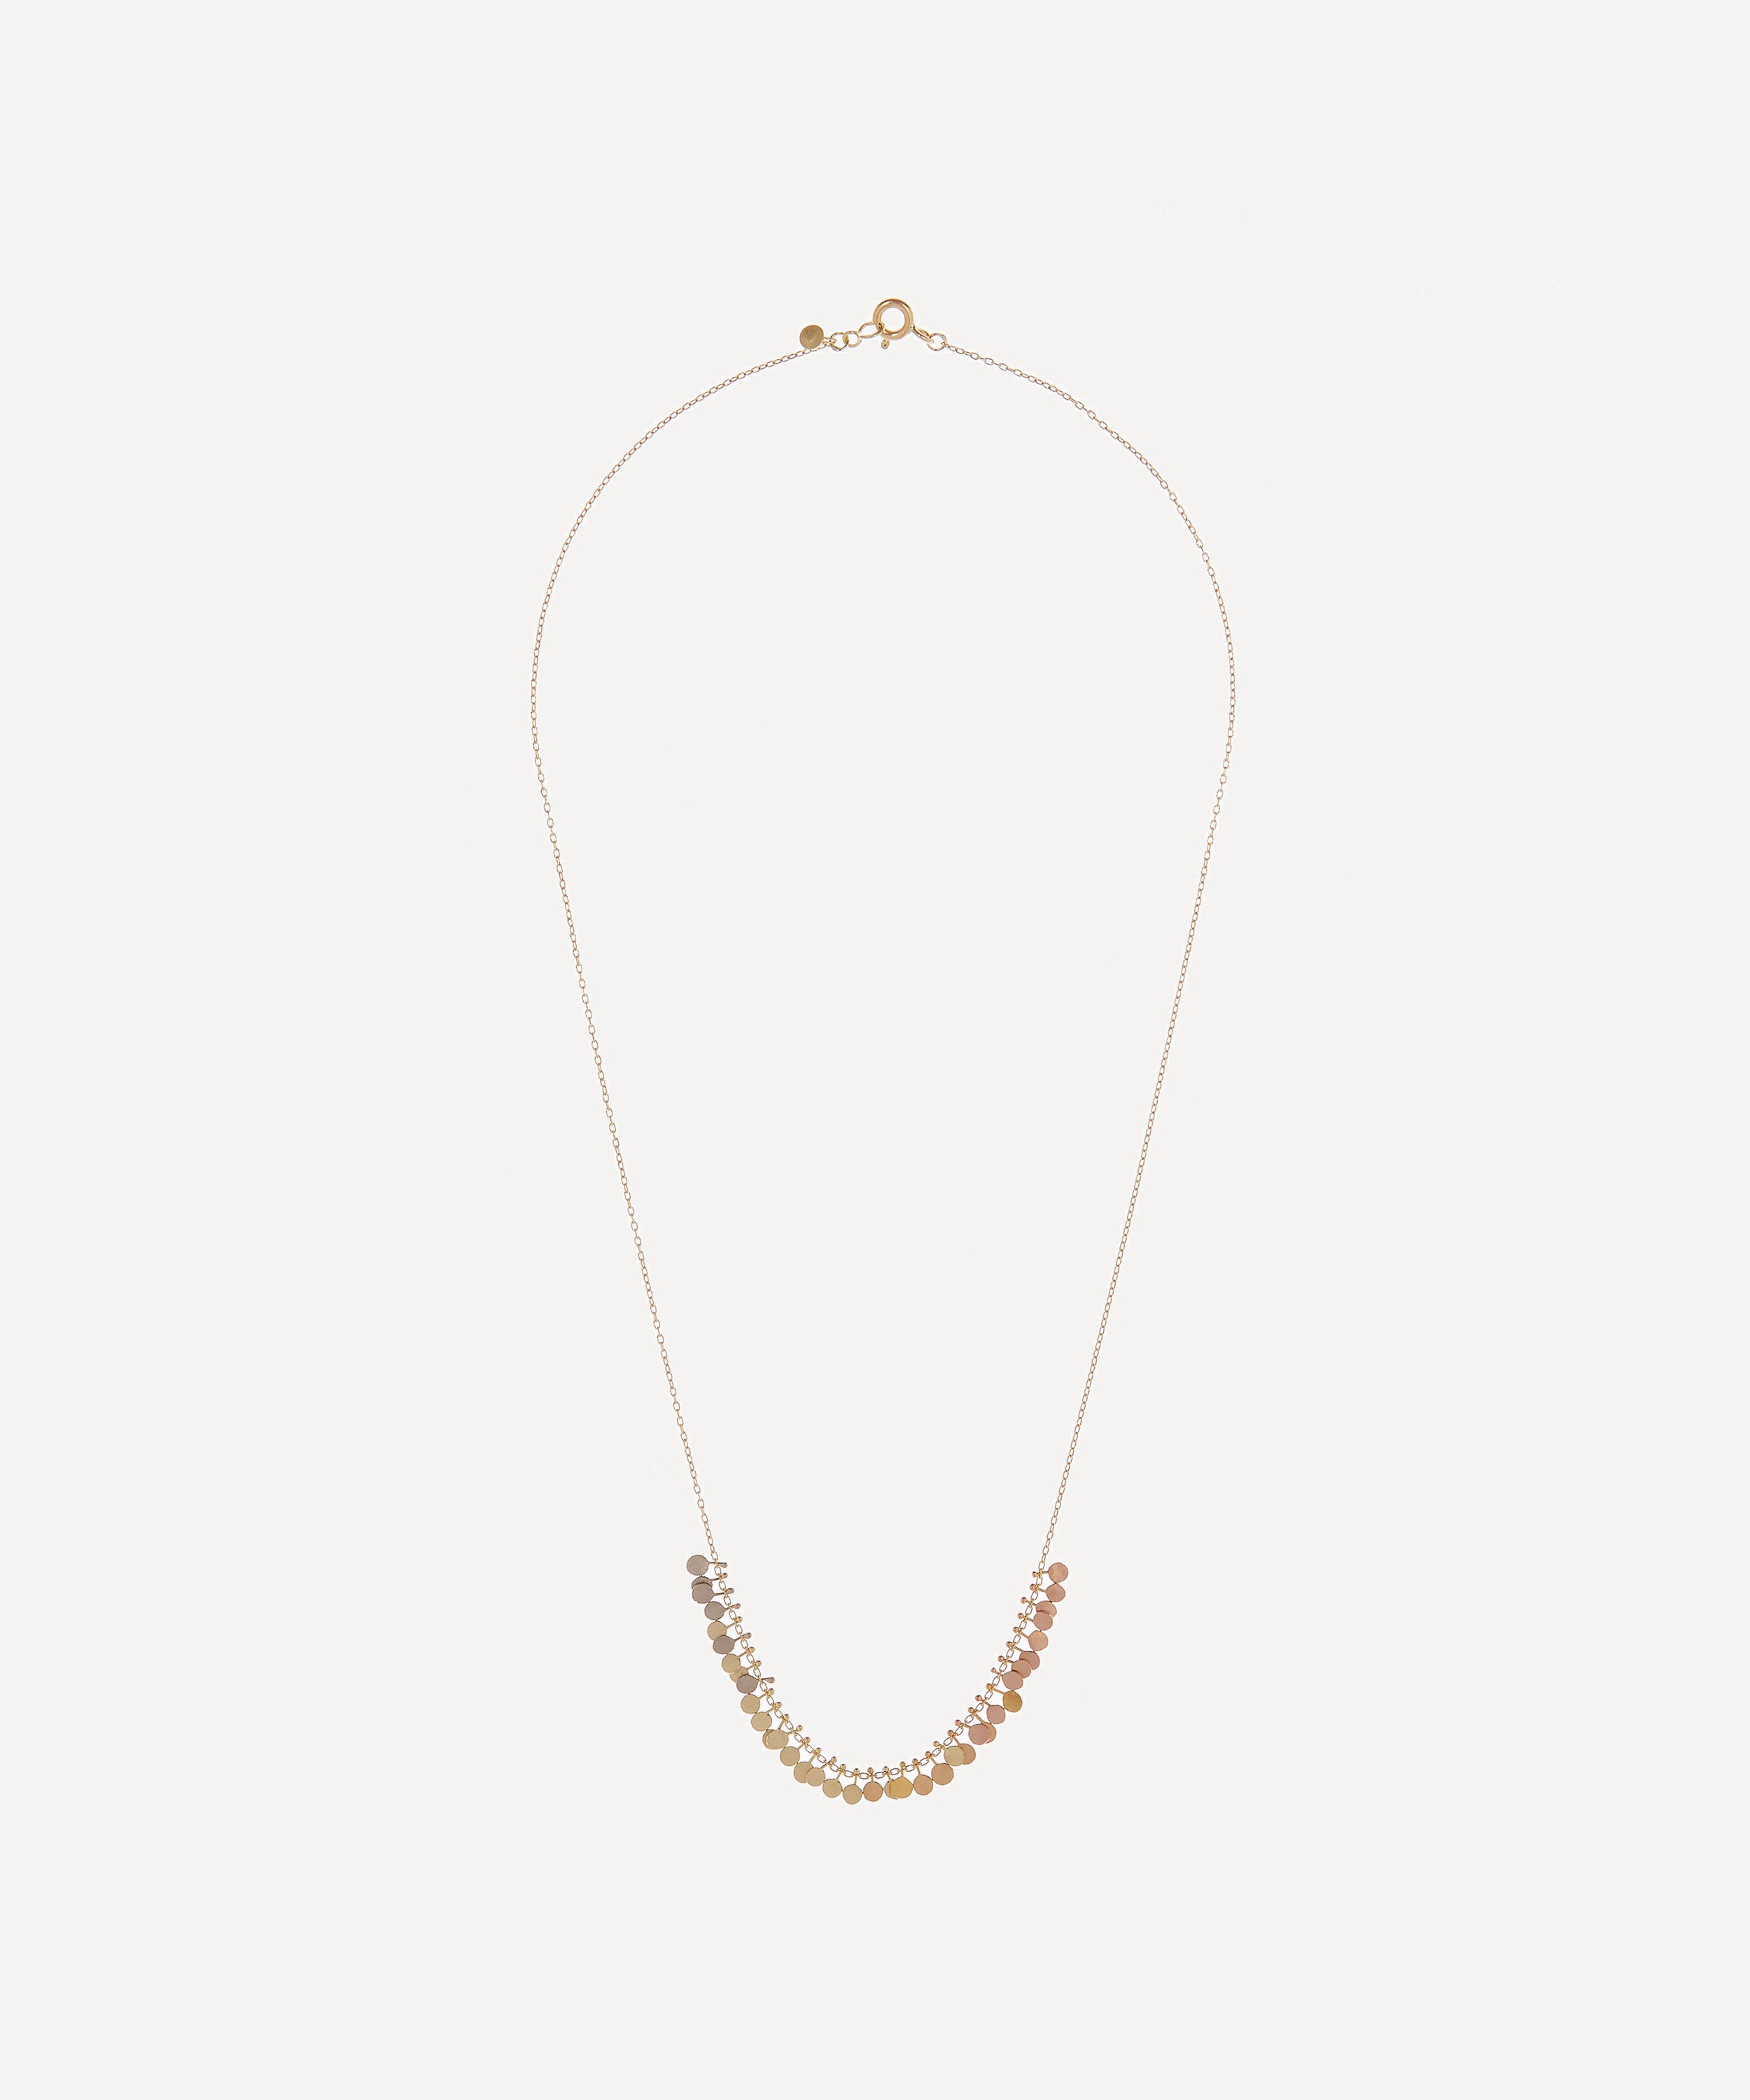 Sia Taylor Jewellery | Necklaces and Earrings | Liberty